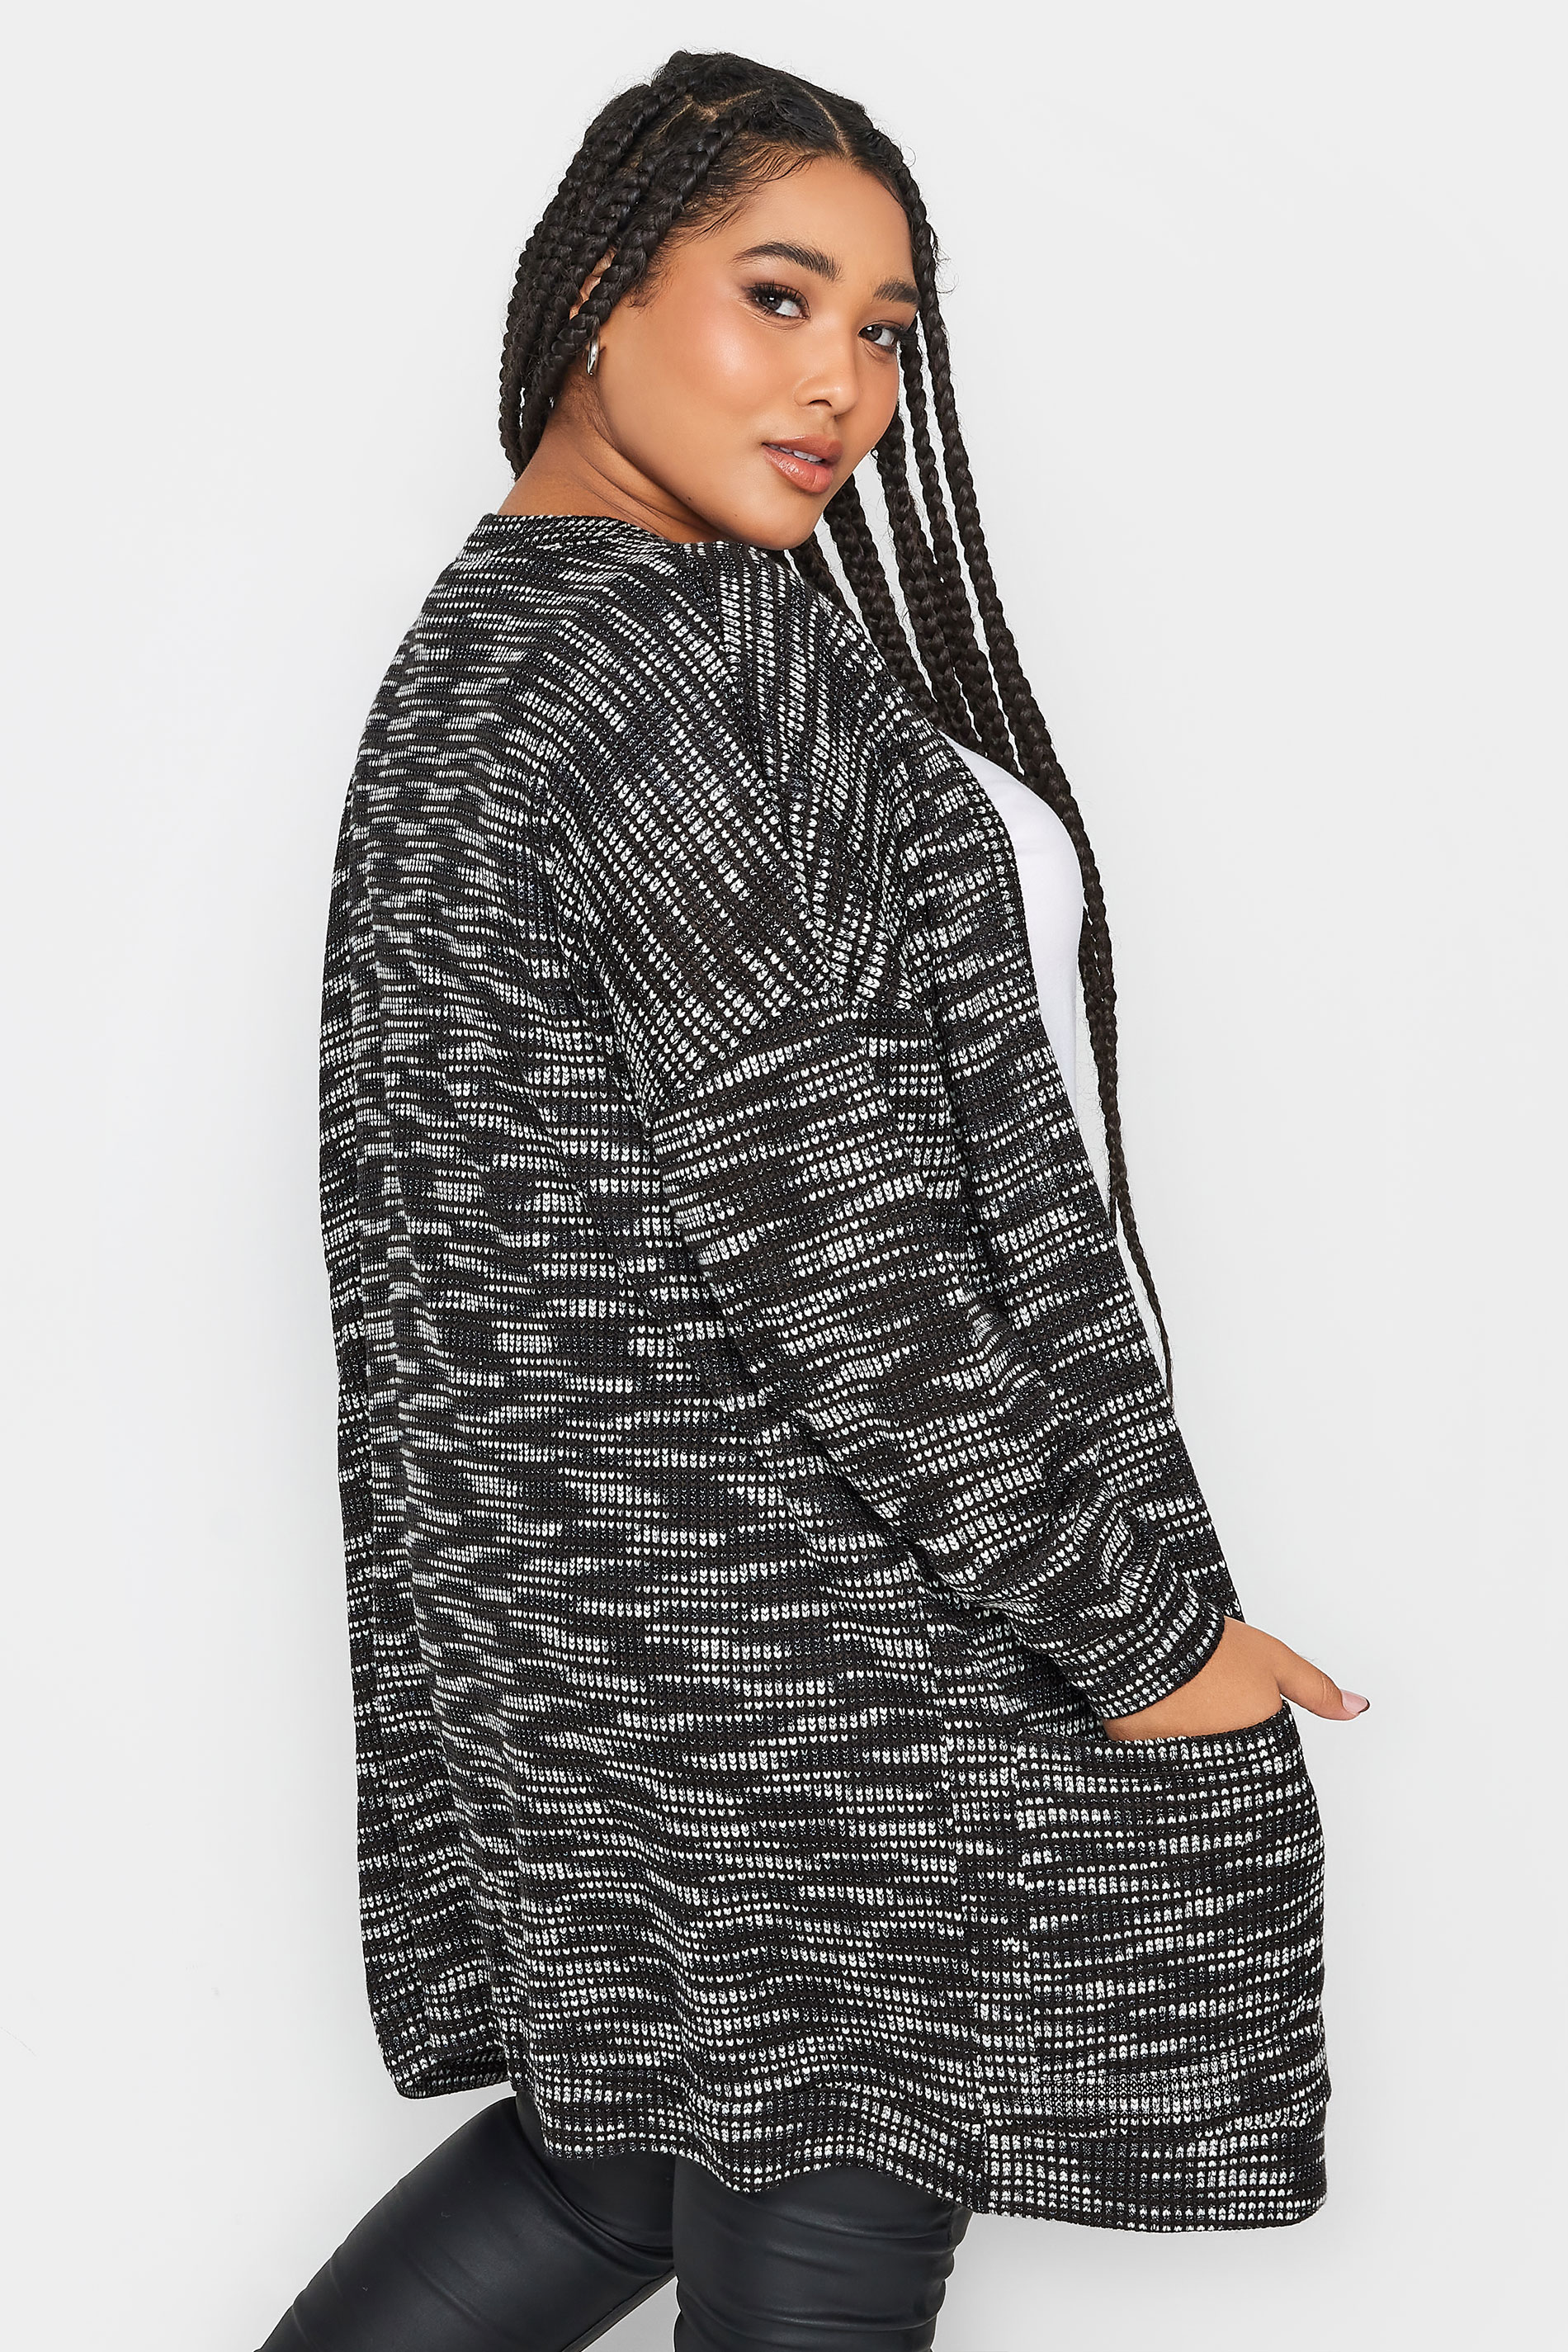 YOURS LUXURY Plus Size Black & White Contrast Knit Cardigan | Yours ...